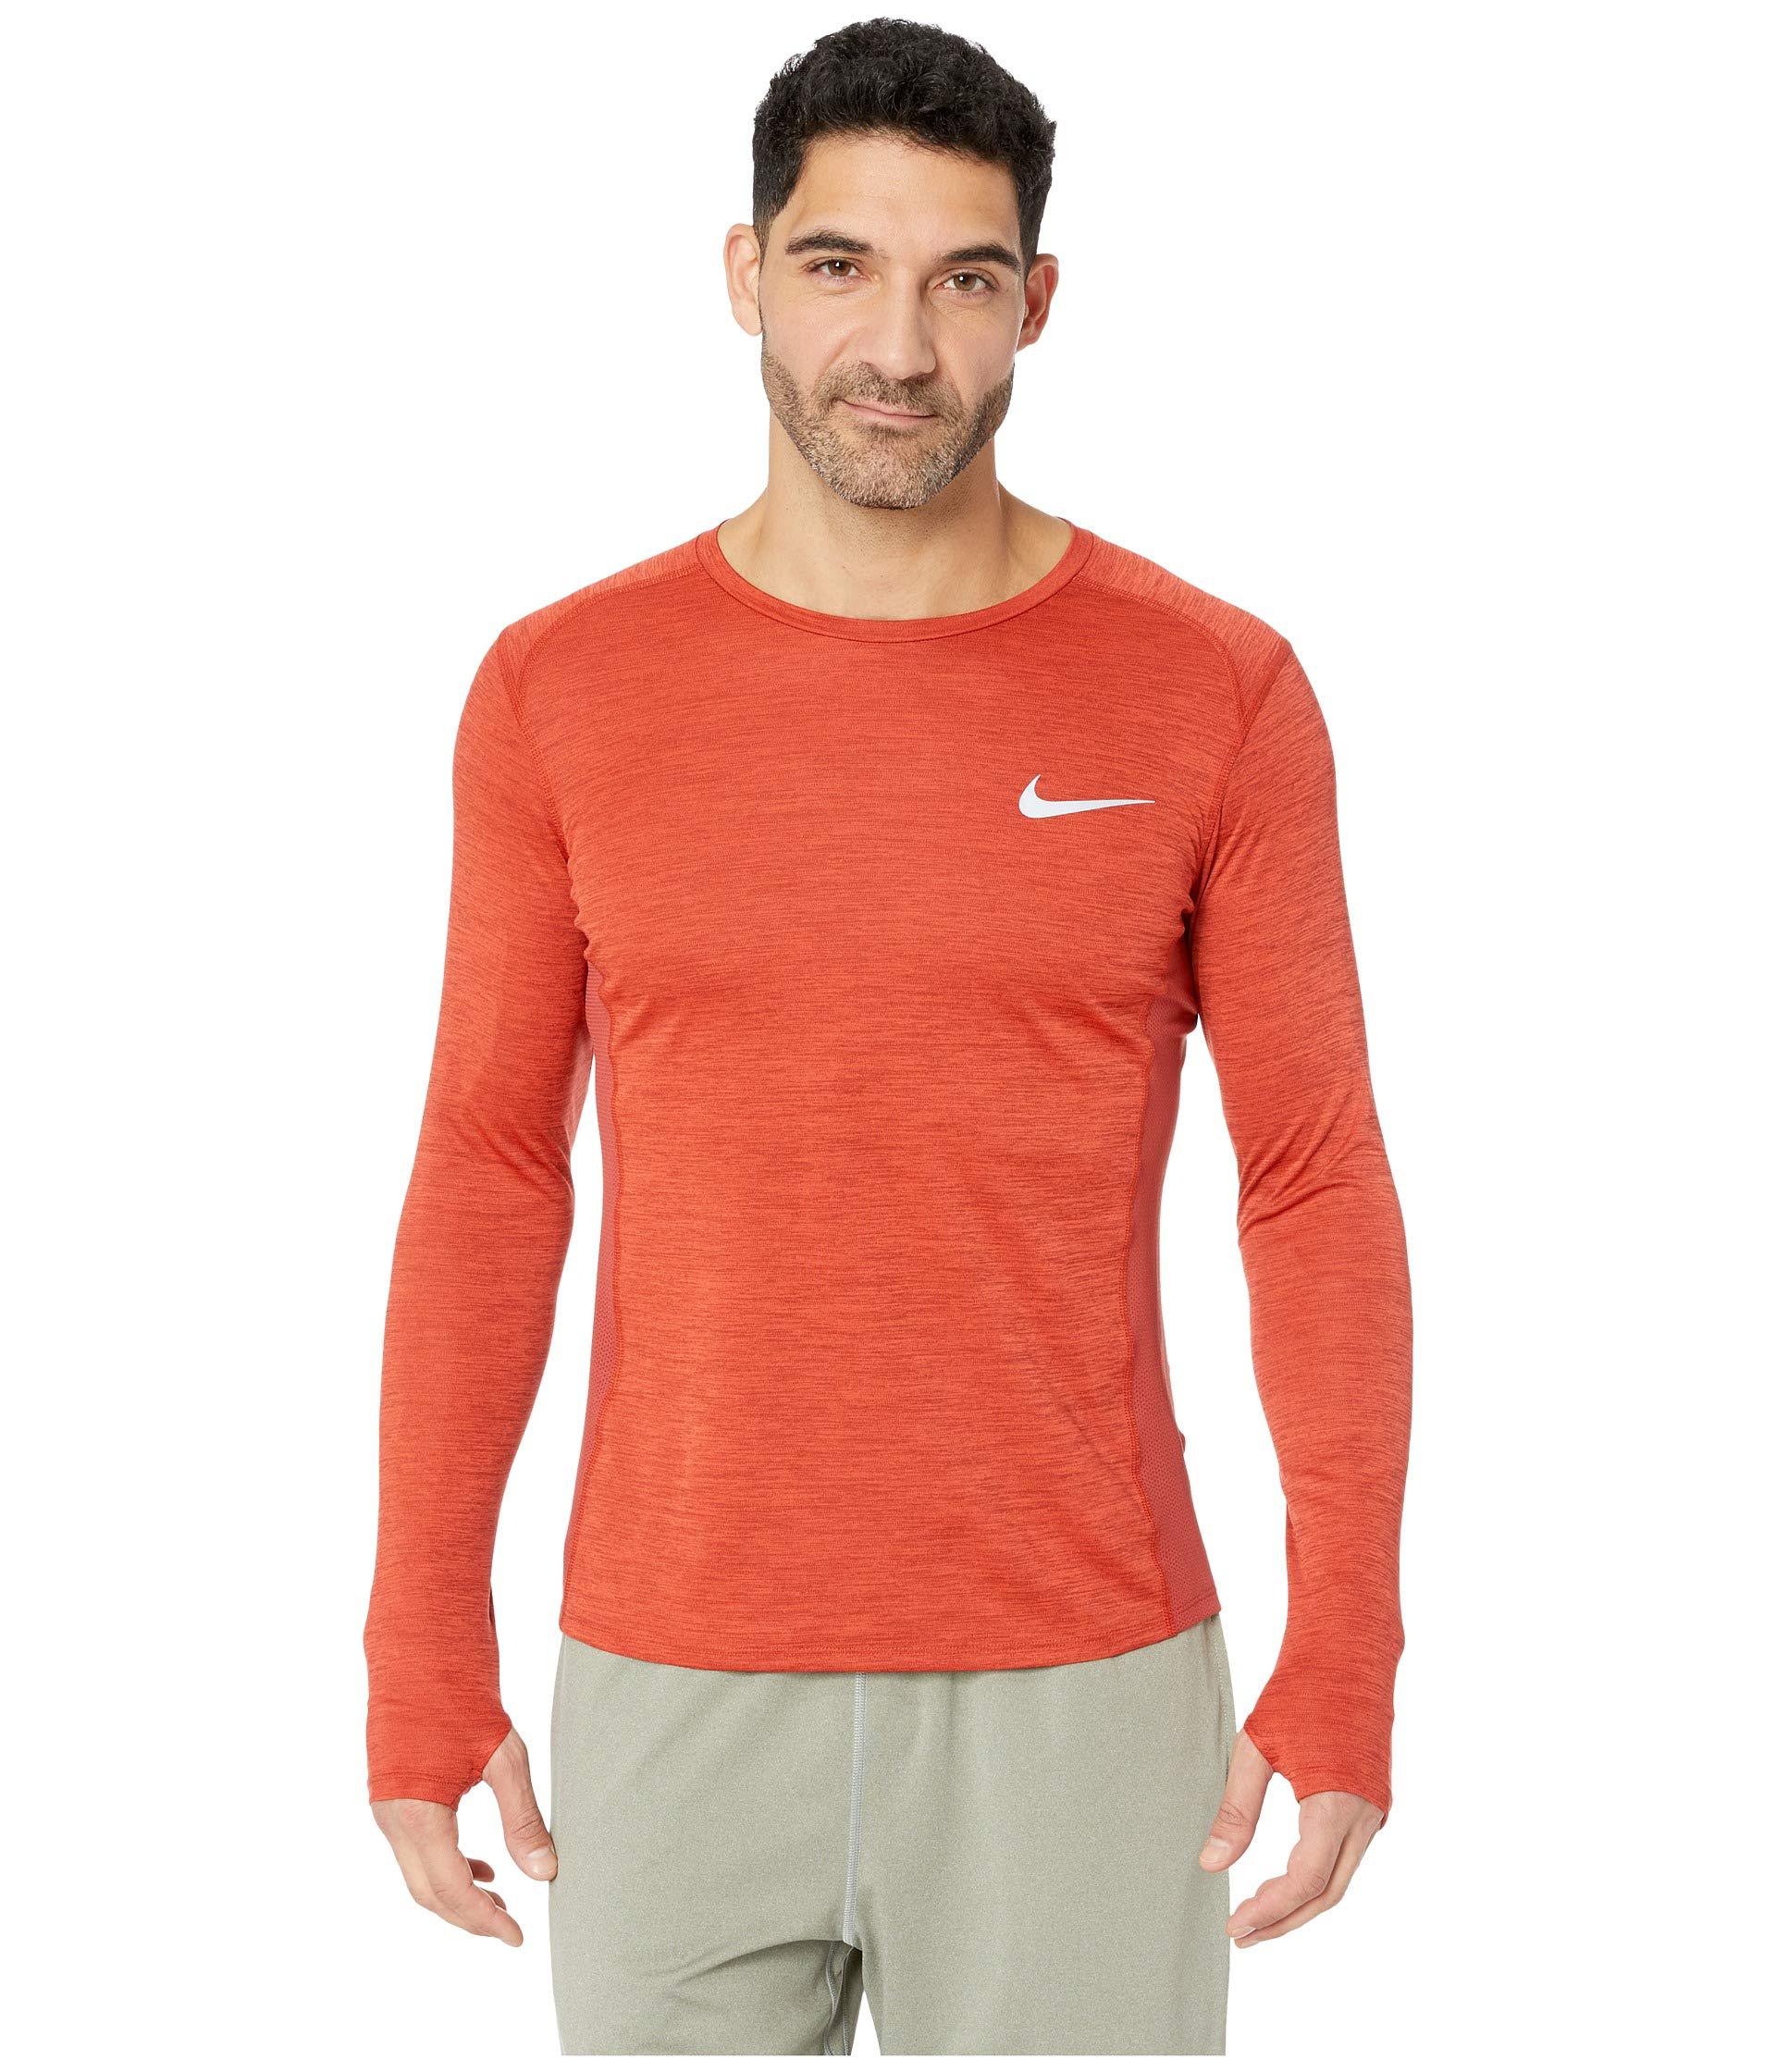 Download Lyst - Nike Dry Miler Long Sleeve Running Top in Red for Men